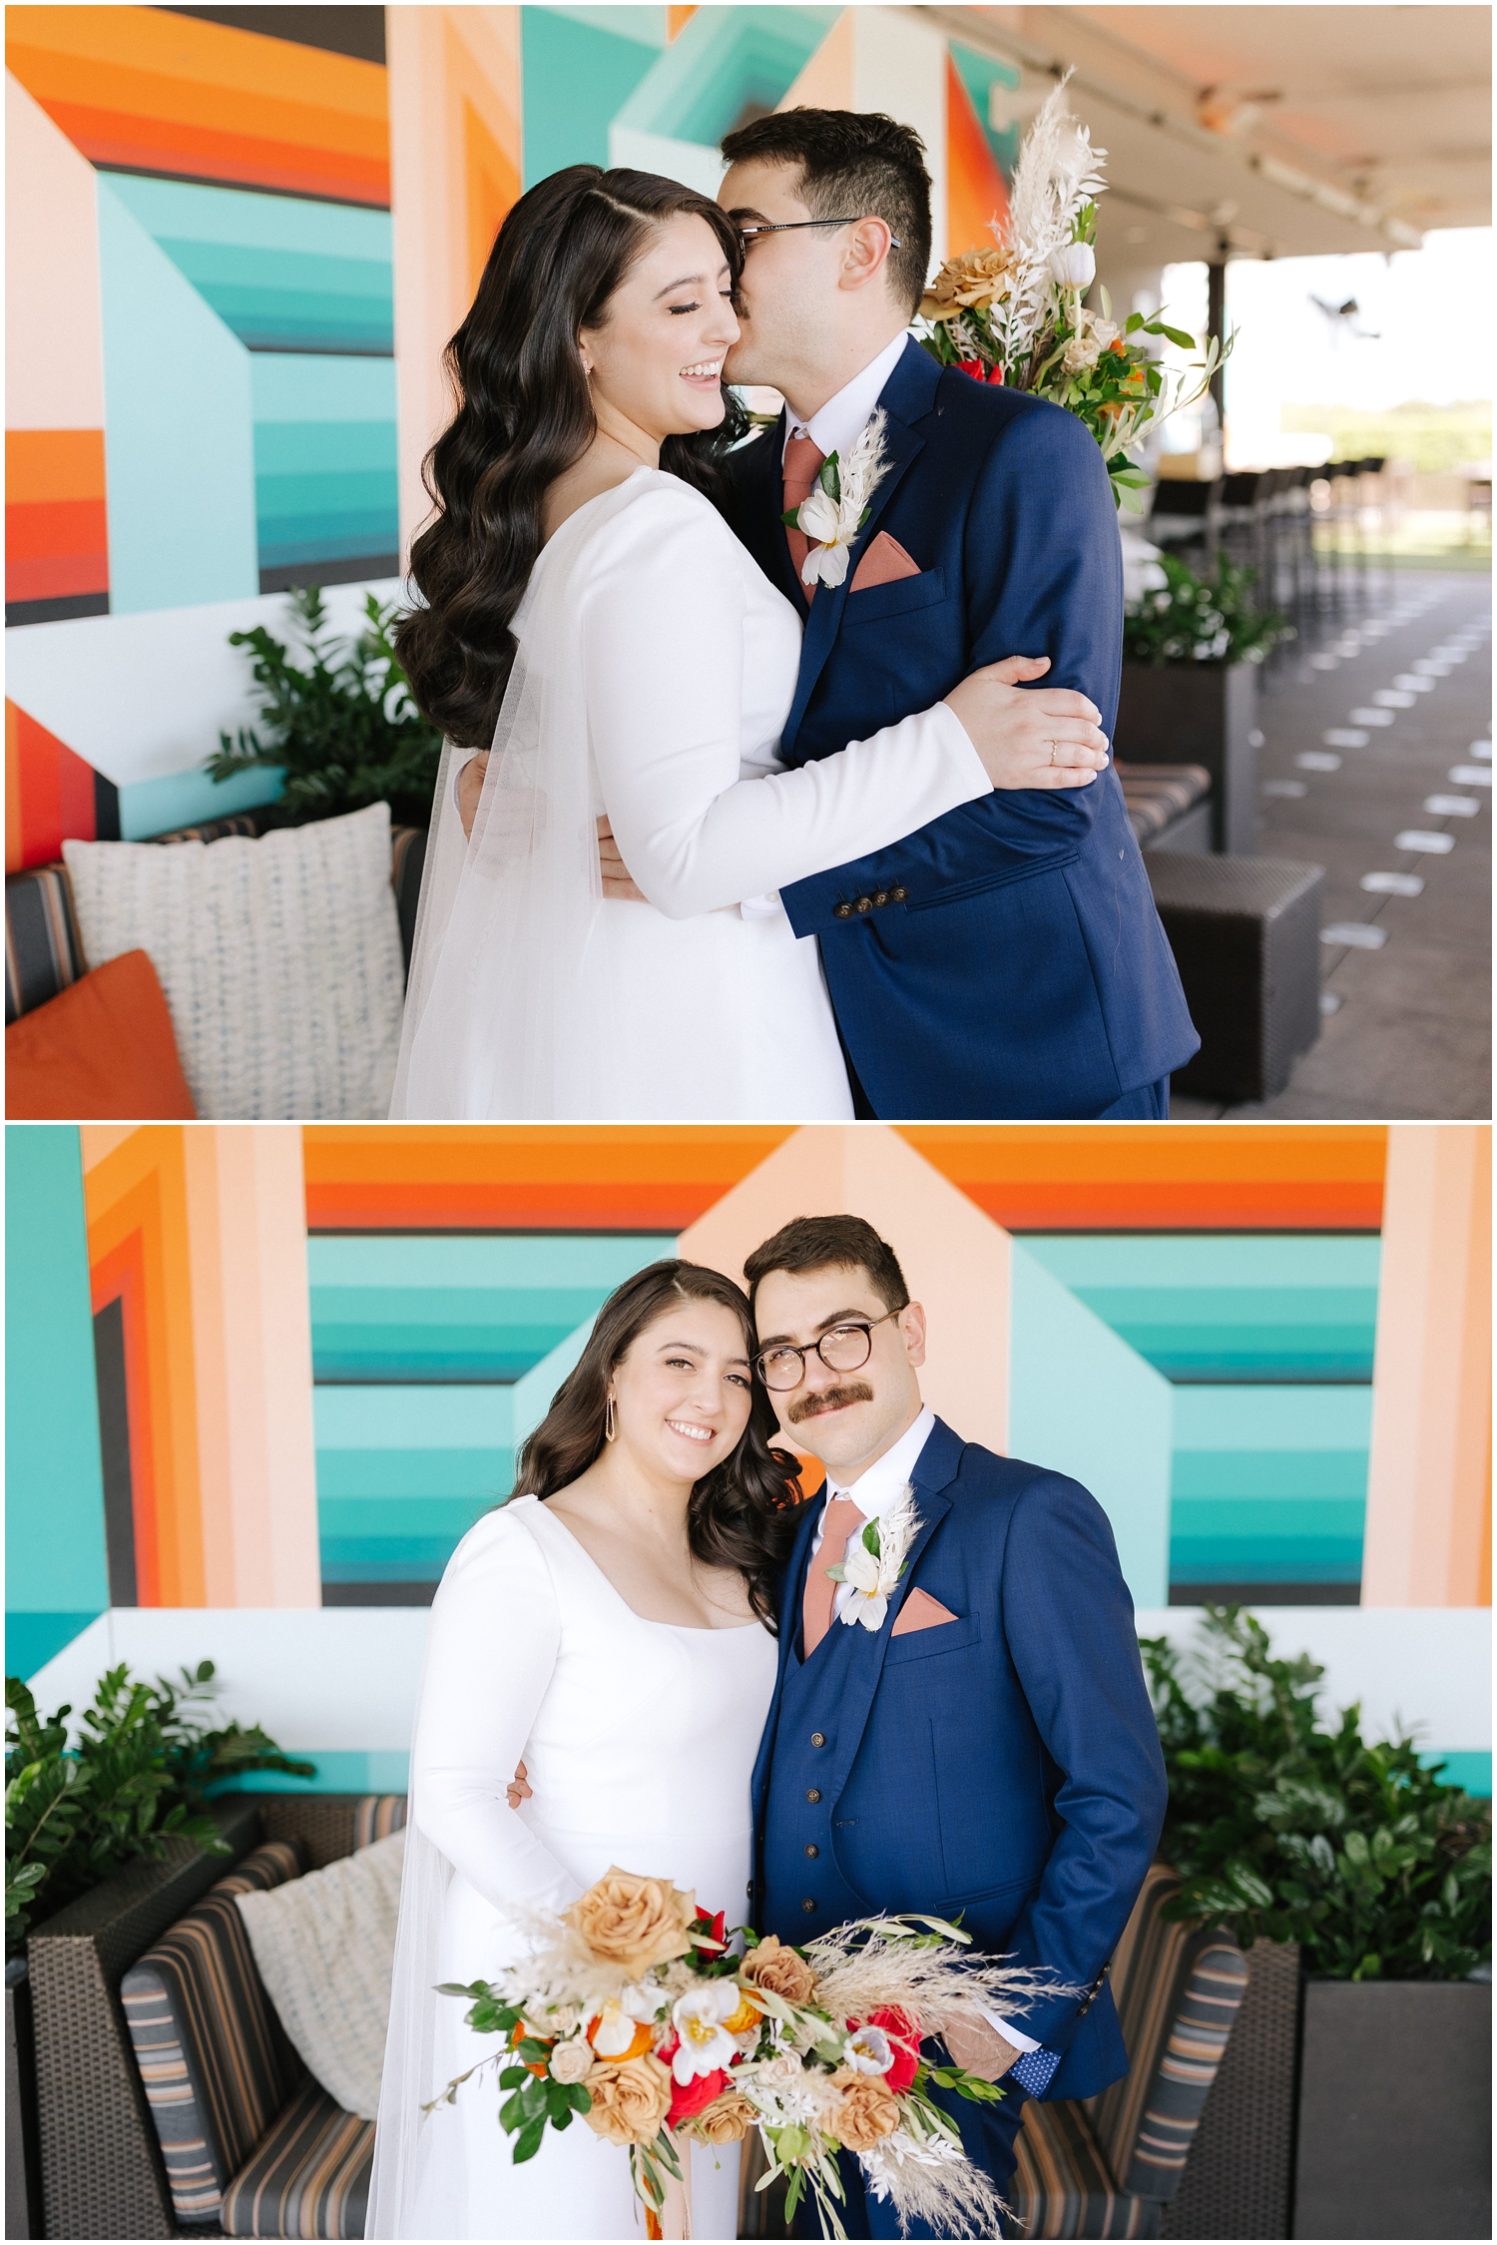 Couple smiles at the camera in front of a colorful mural on their wedding day in Tampa, FL